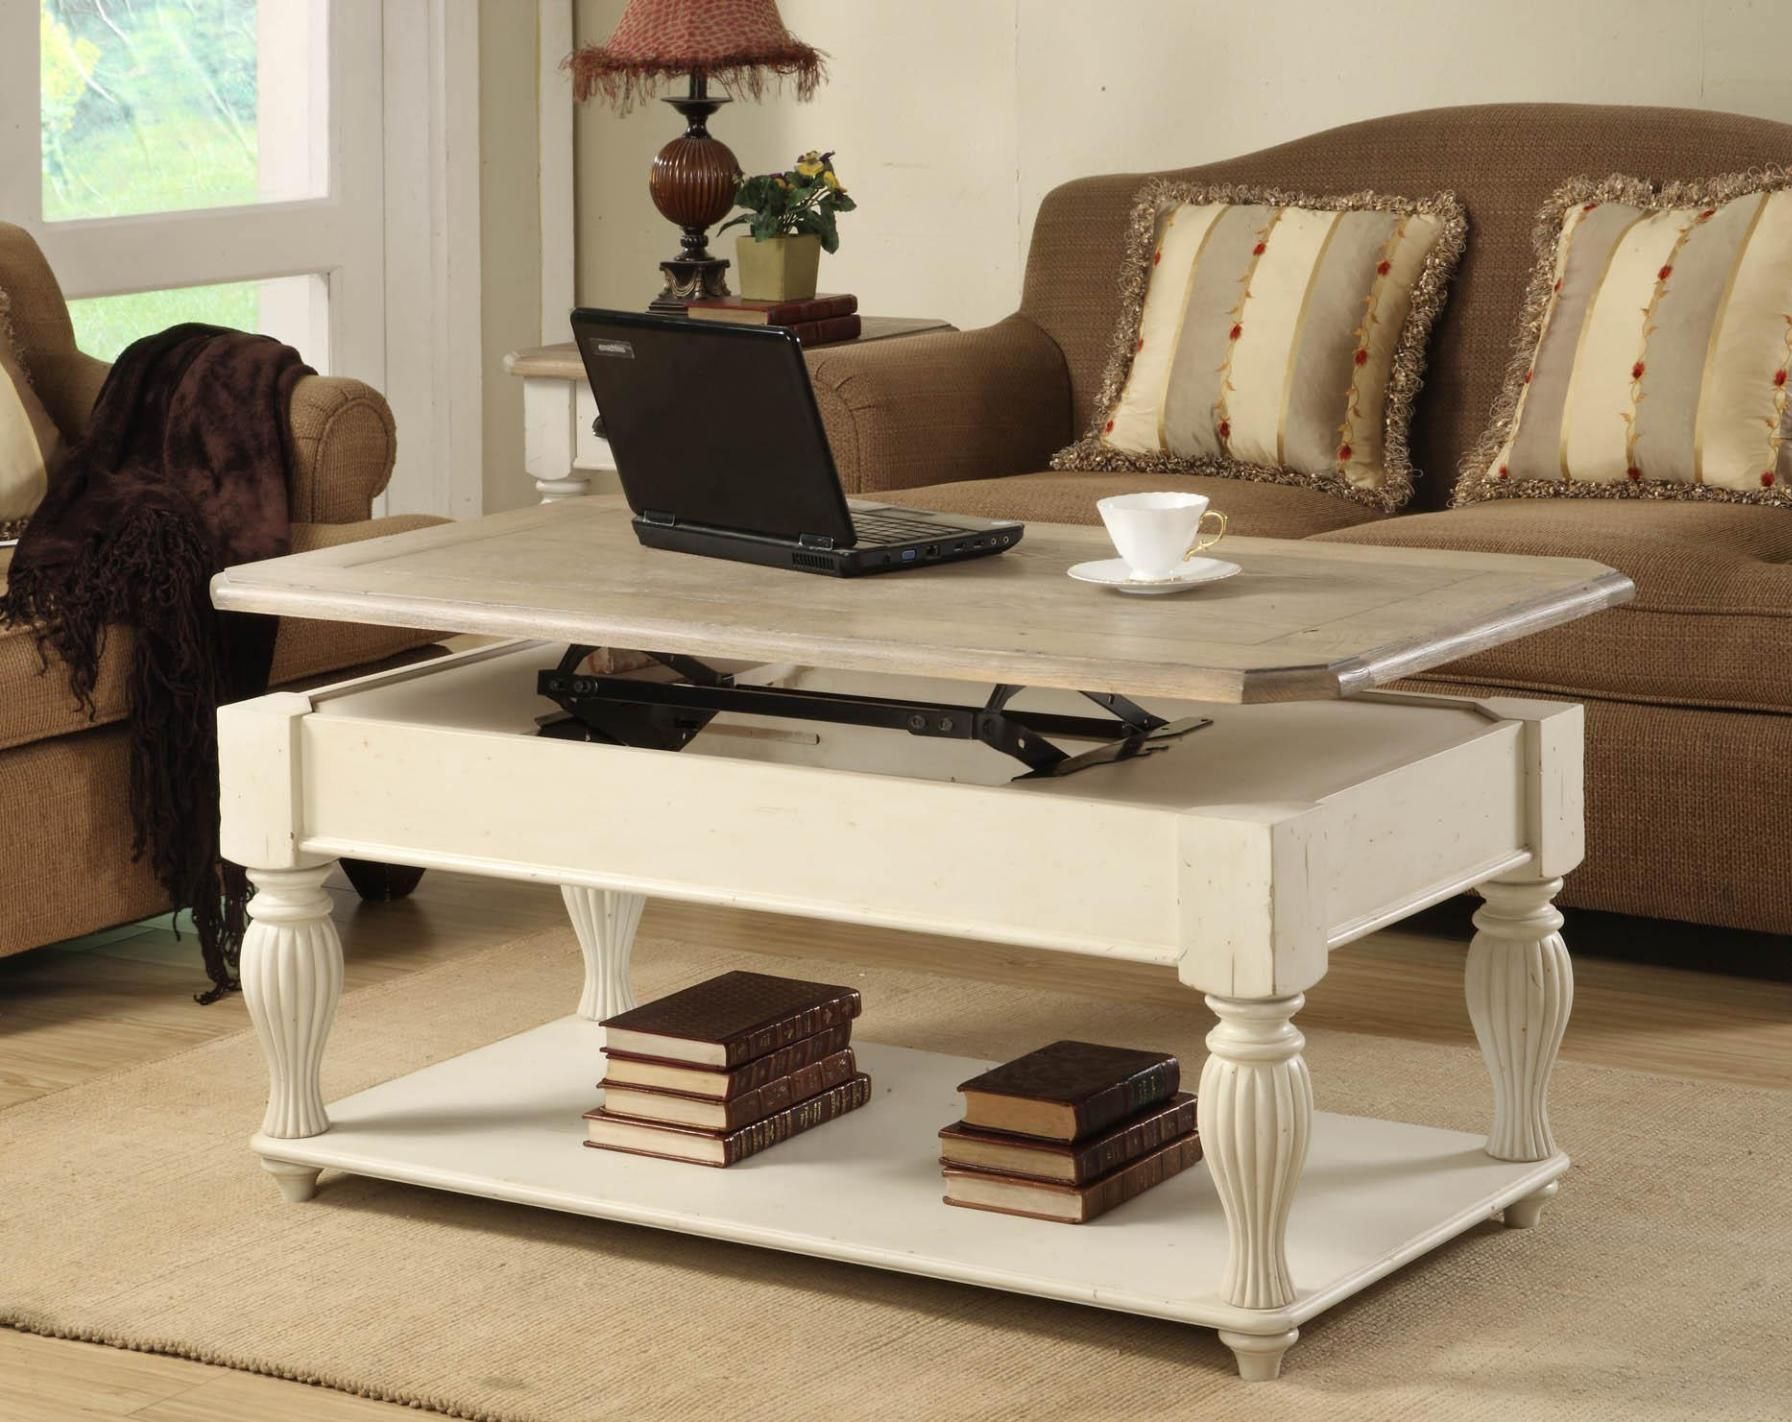 Most Current Lift Top Coffee Tables With Storage Throughout Lift Top Coffee Tables With Storage (View 12 of 15)